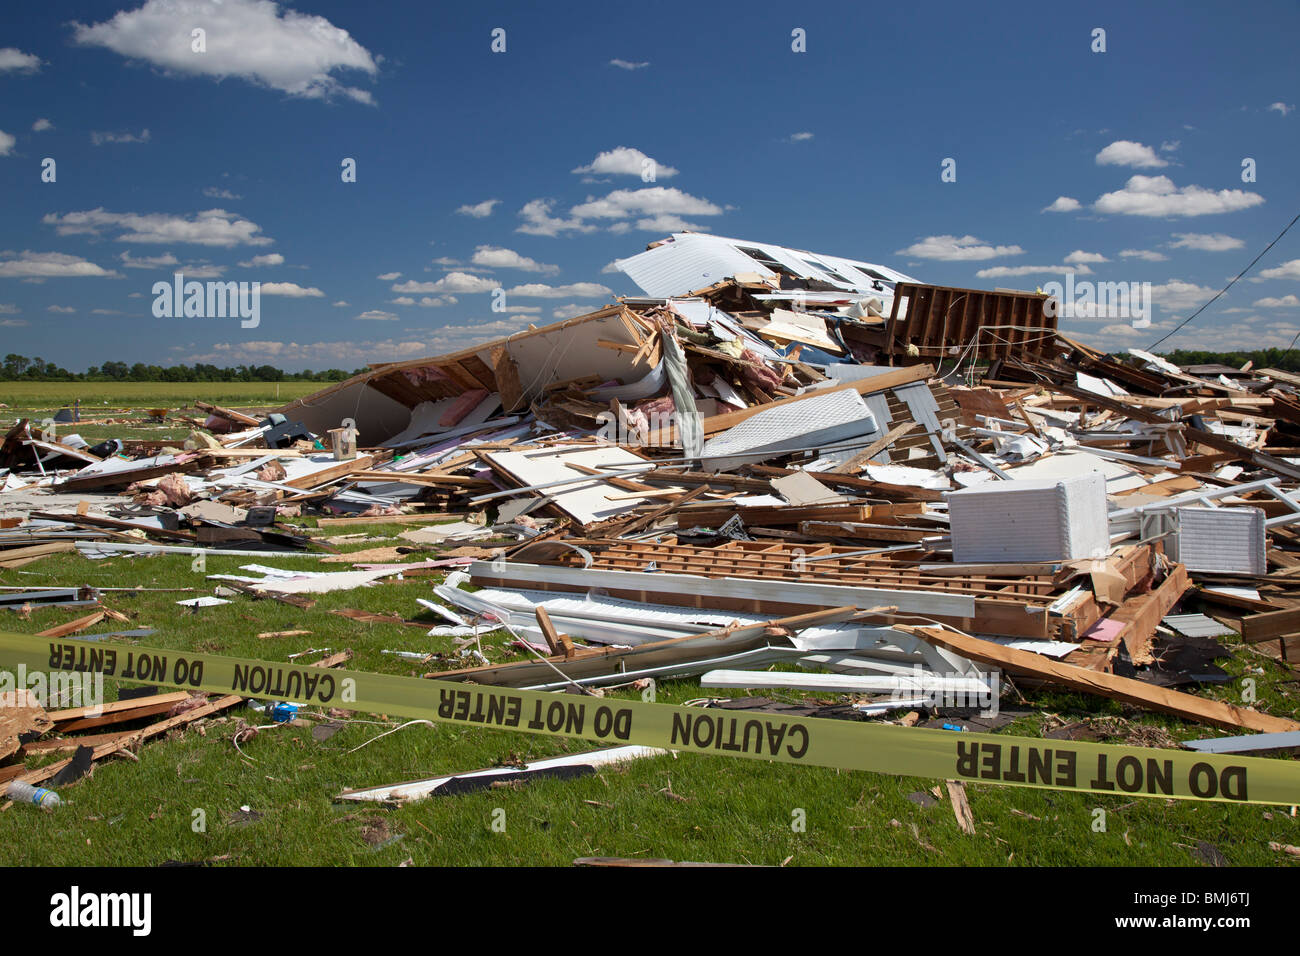 Dundee, Michigan A house destroyed by a tornado Stock Photo Alamy